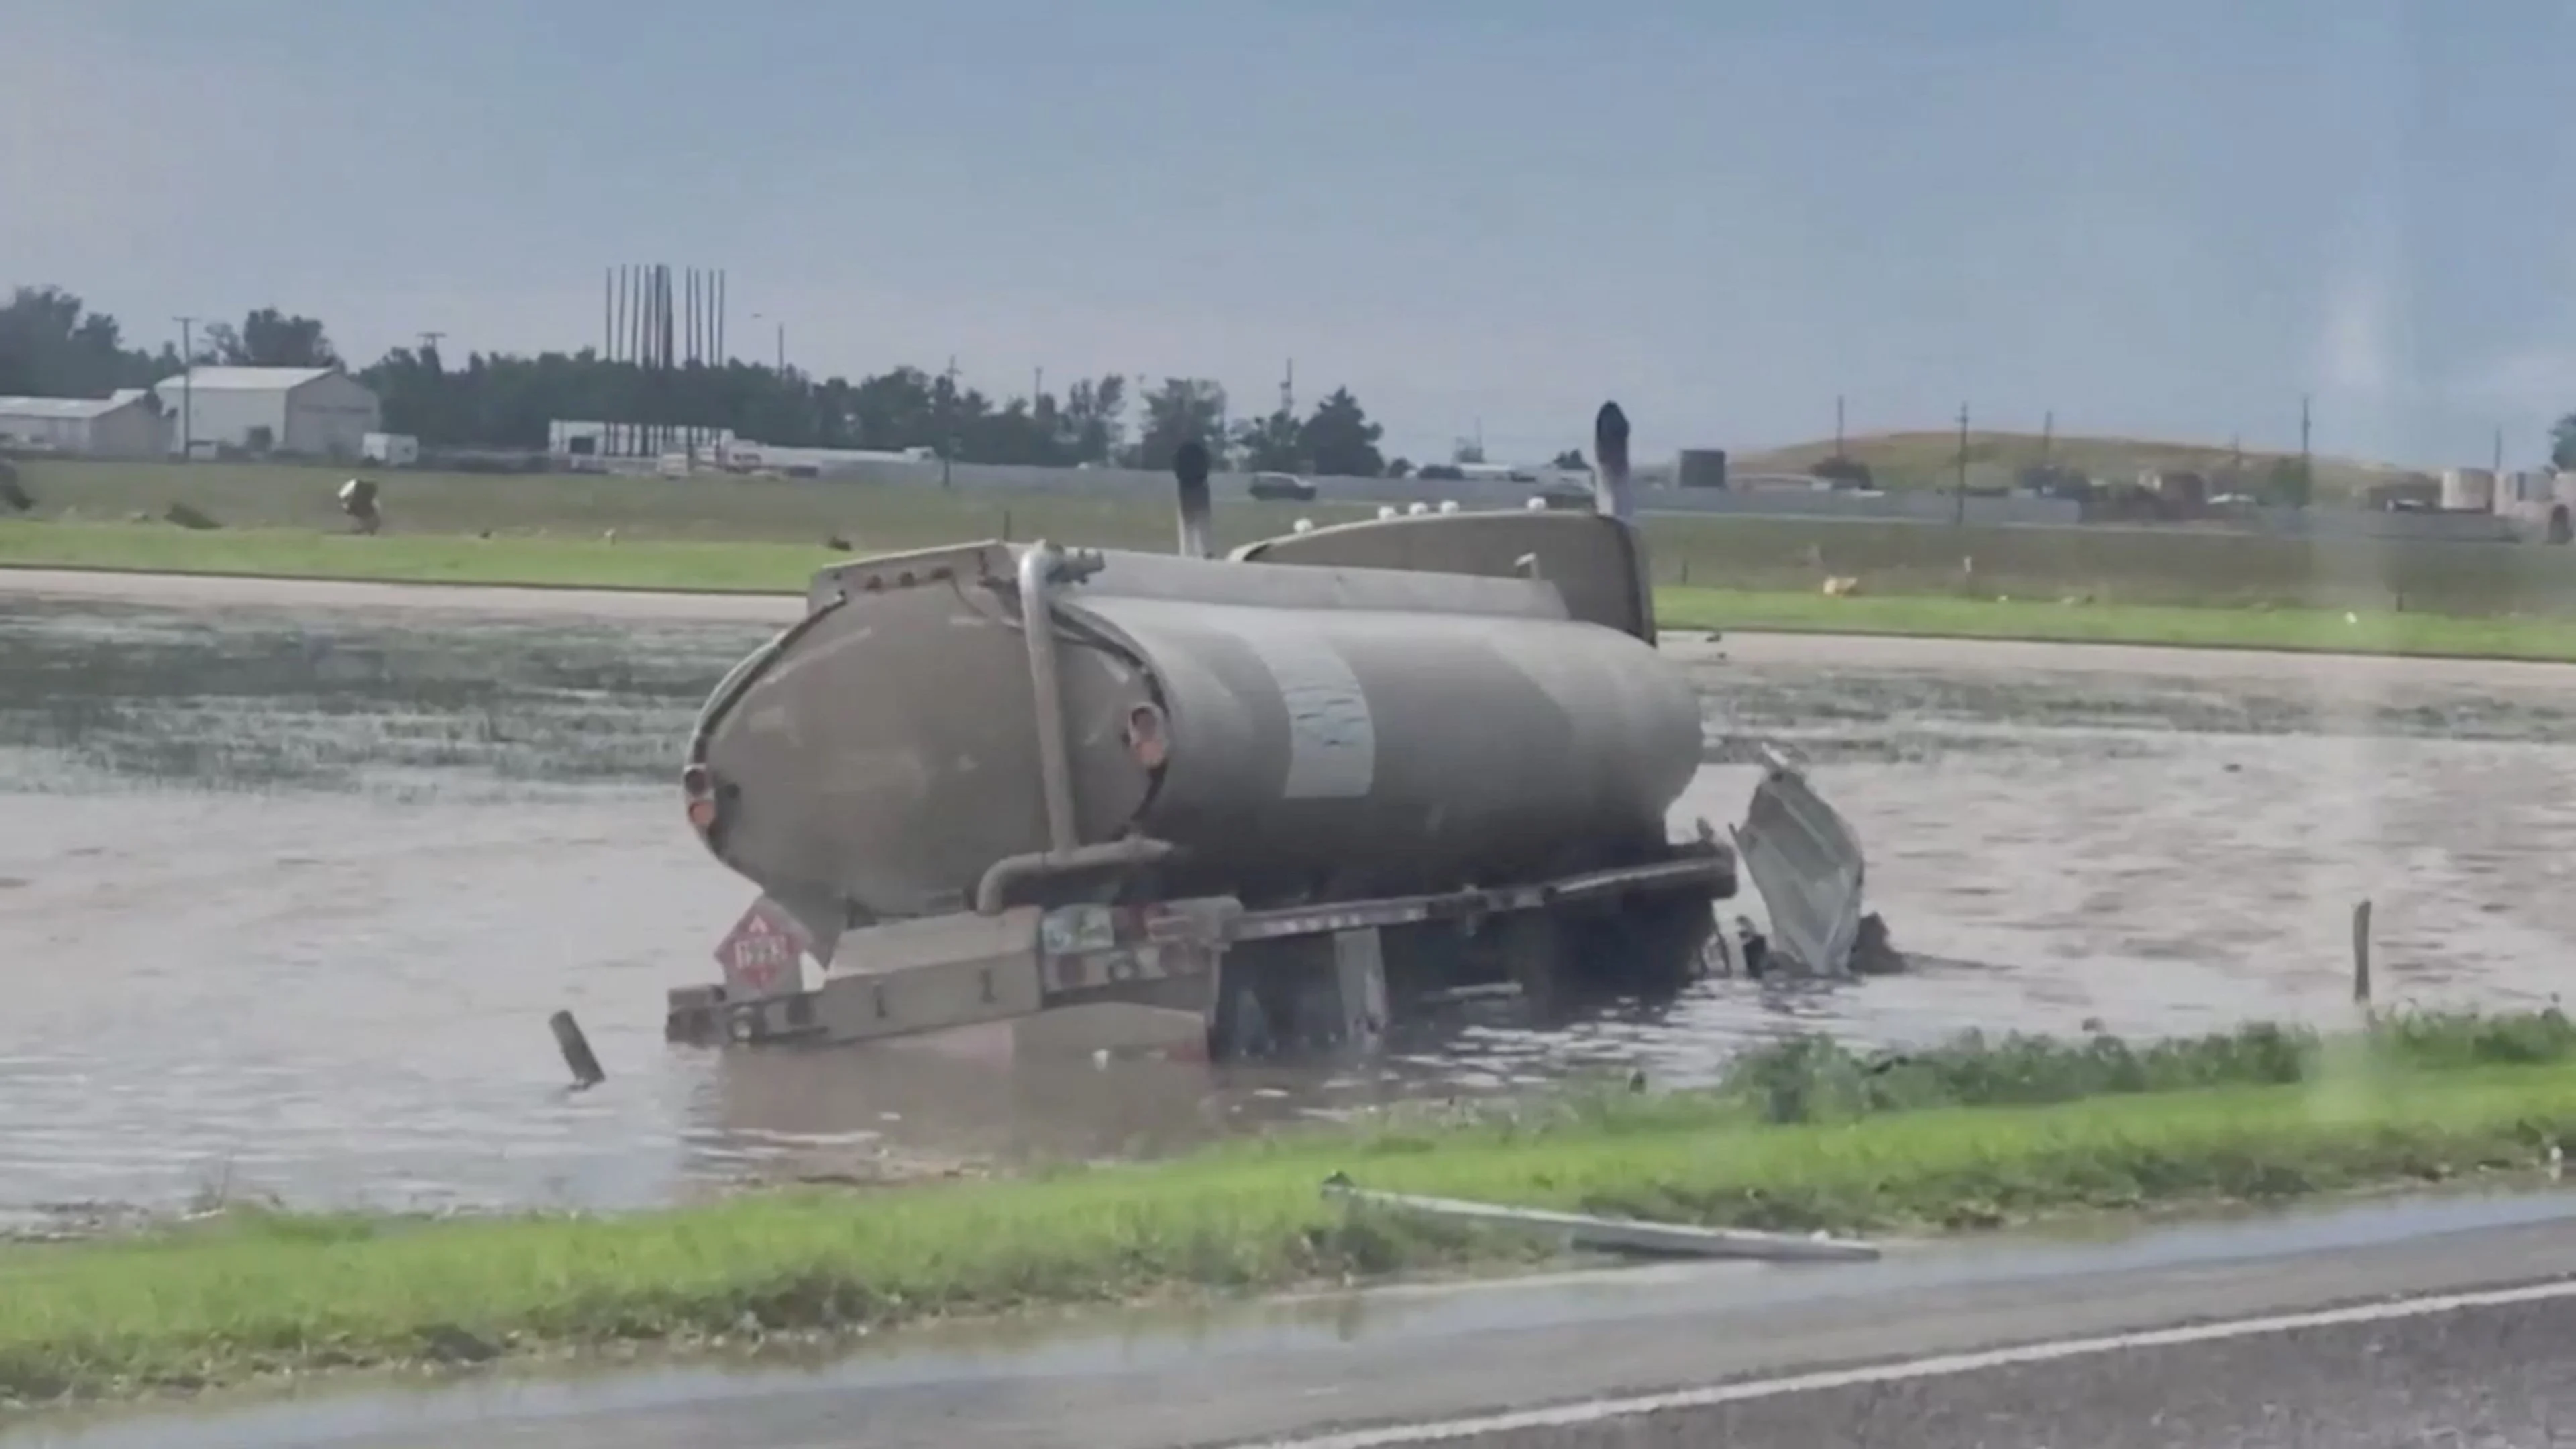 Reuters: A tank truck gets partially submerge in water in Perryton as the town gets struck by a tornado, in Texas, U.S. June 15, 2023, in this screengrab obtained from a social media video. Sabrina Devers via TMX/via REUTERS